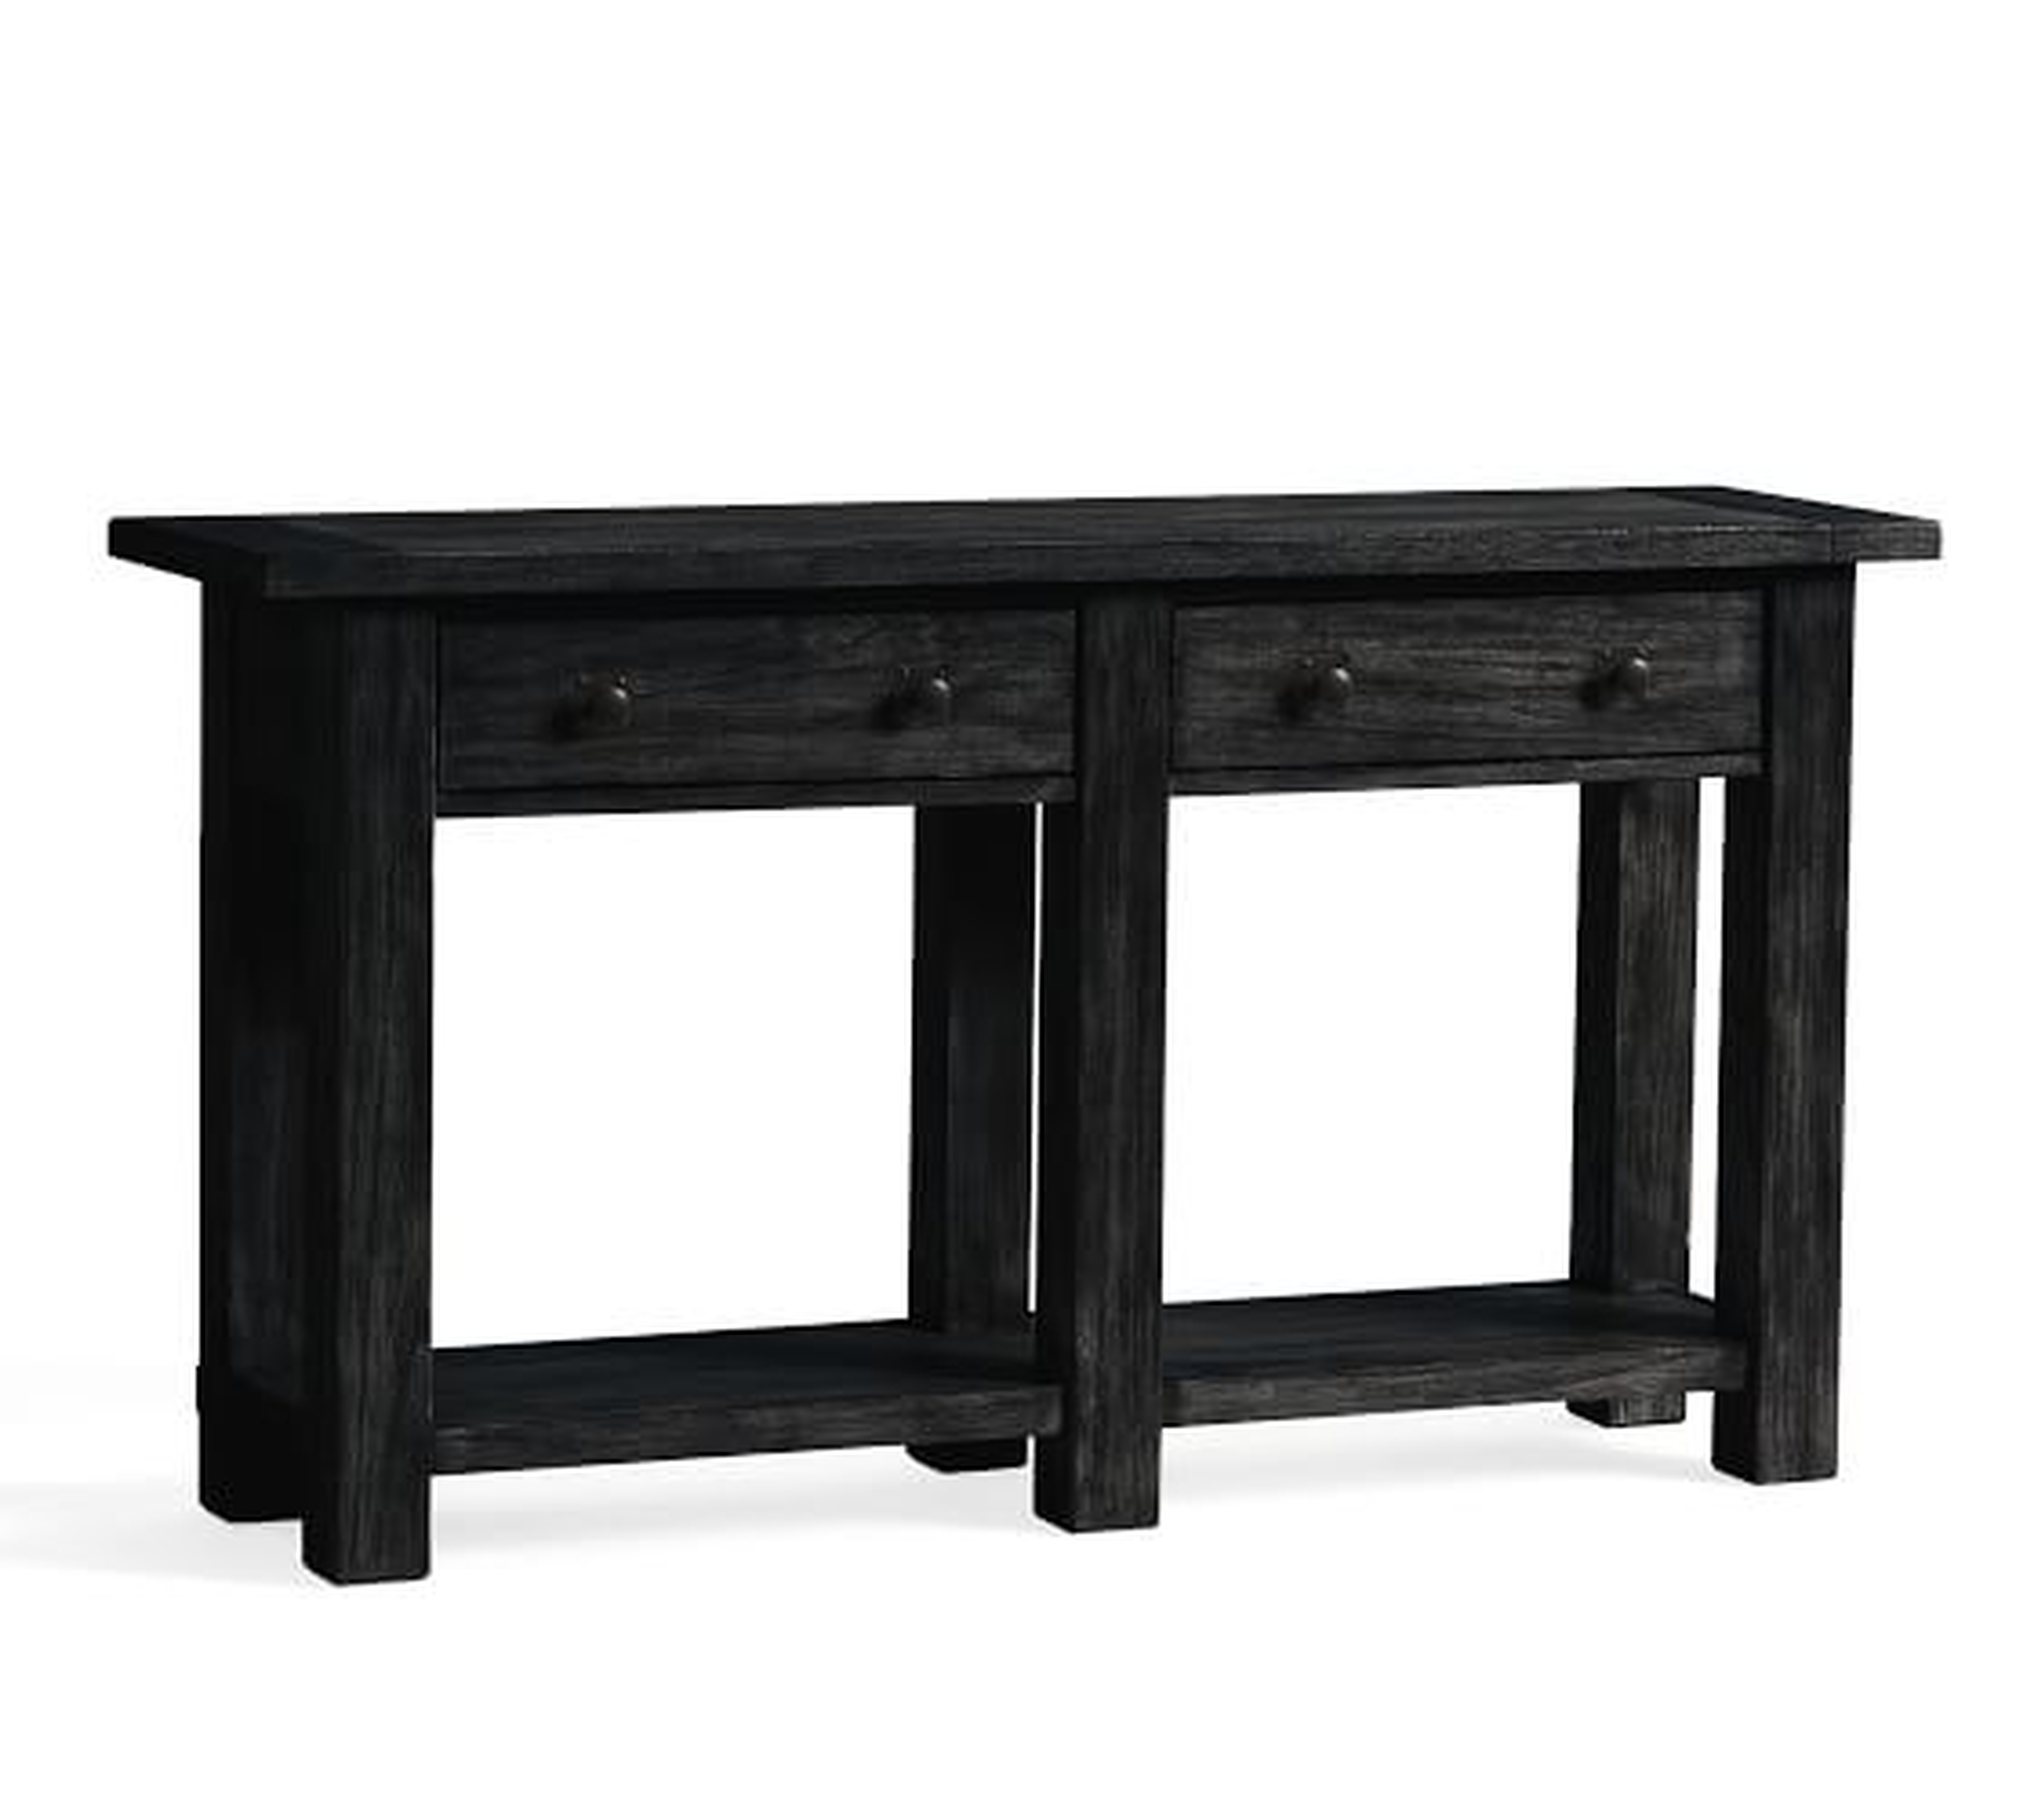 Benchwright 54" Wood Console Table with Drawers, Blackened Oak - Pottery Barn